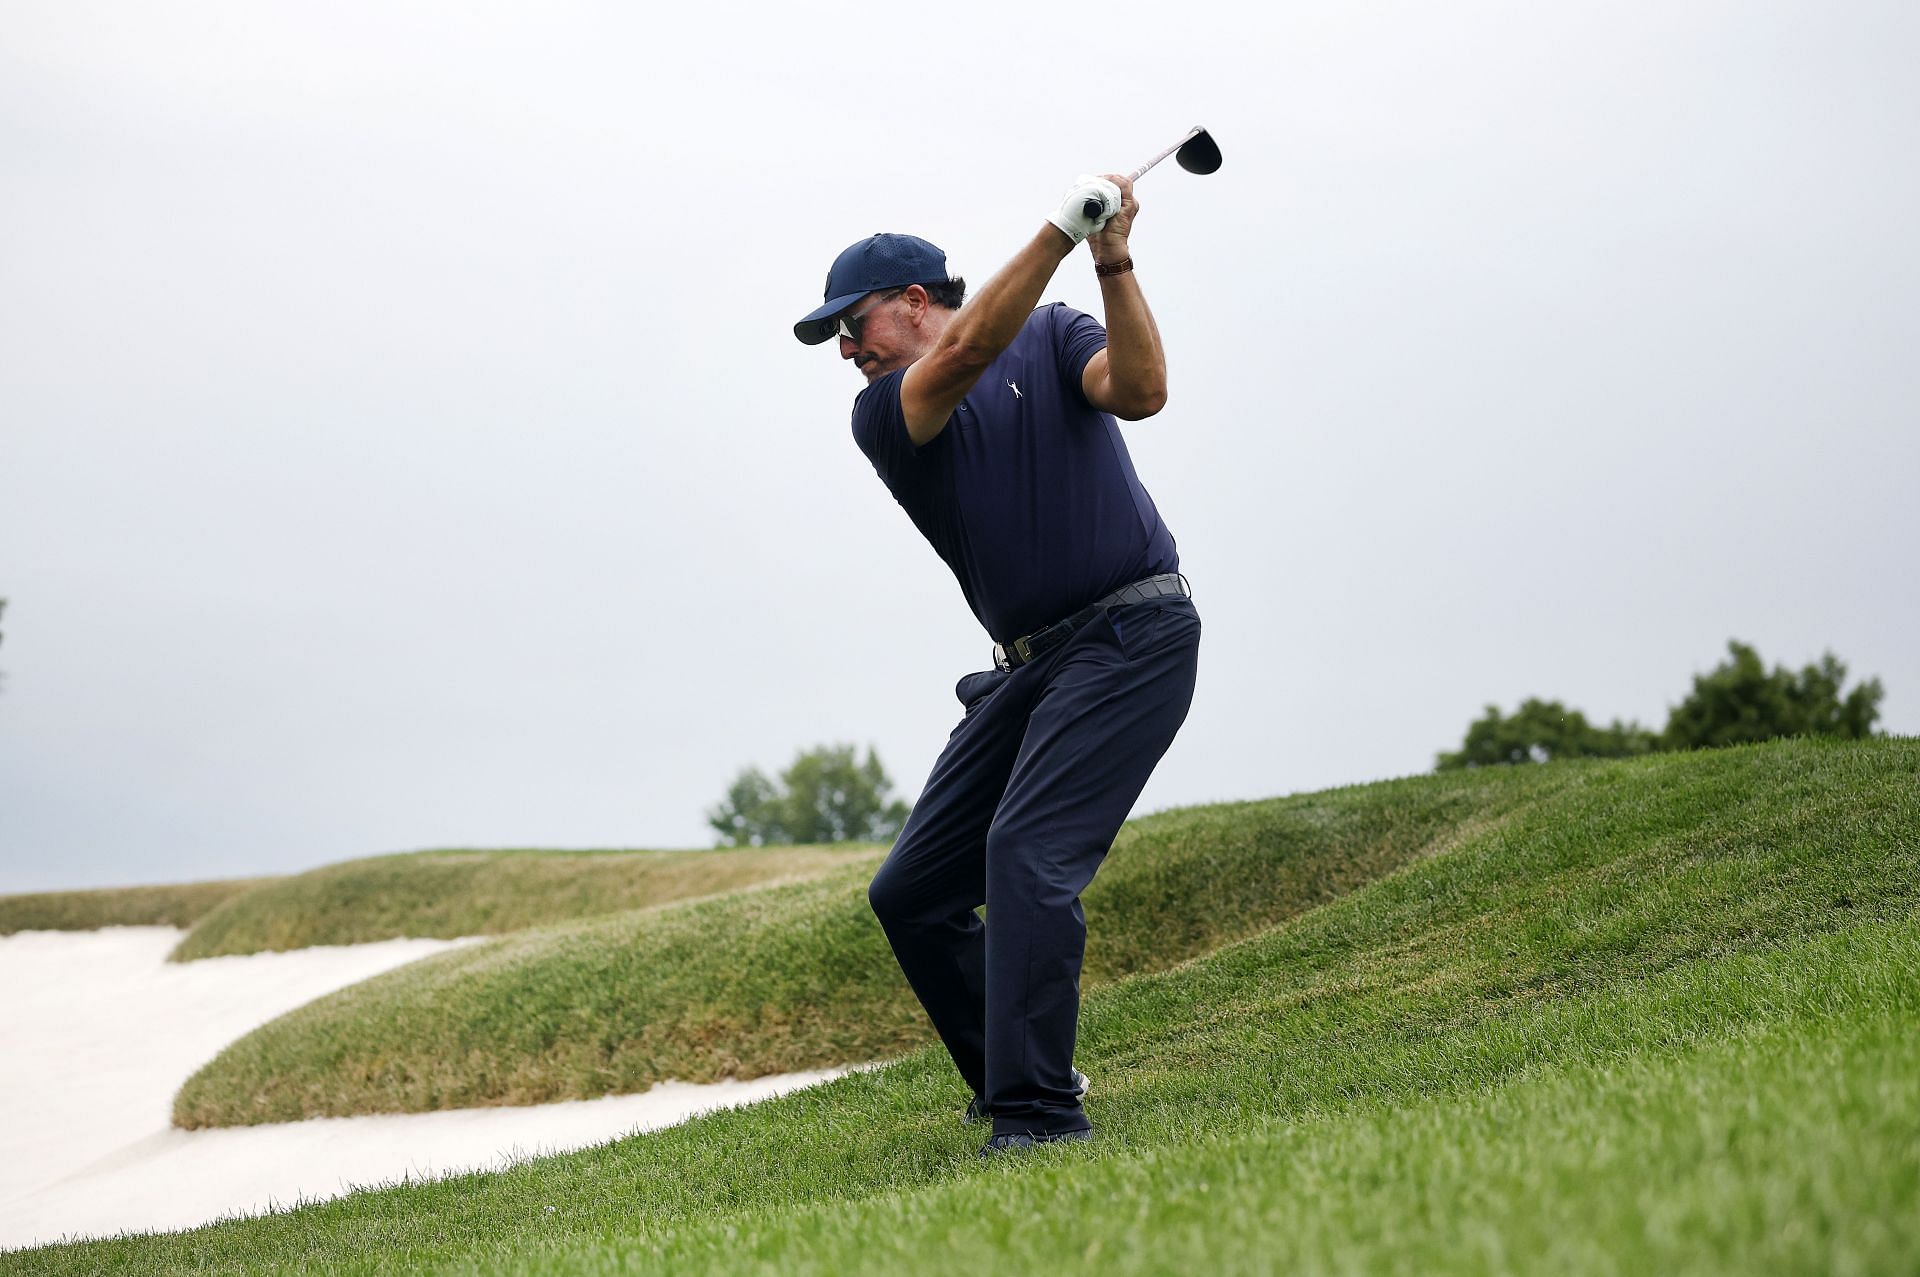 Phil Mickelson of Hy Flyers GC plays his second shot on the 15th hole during the LIV Golf Invitational.